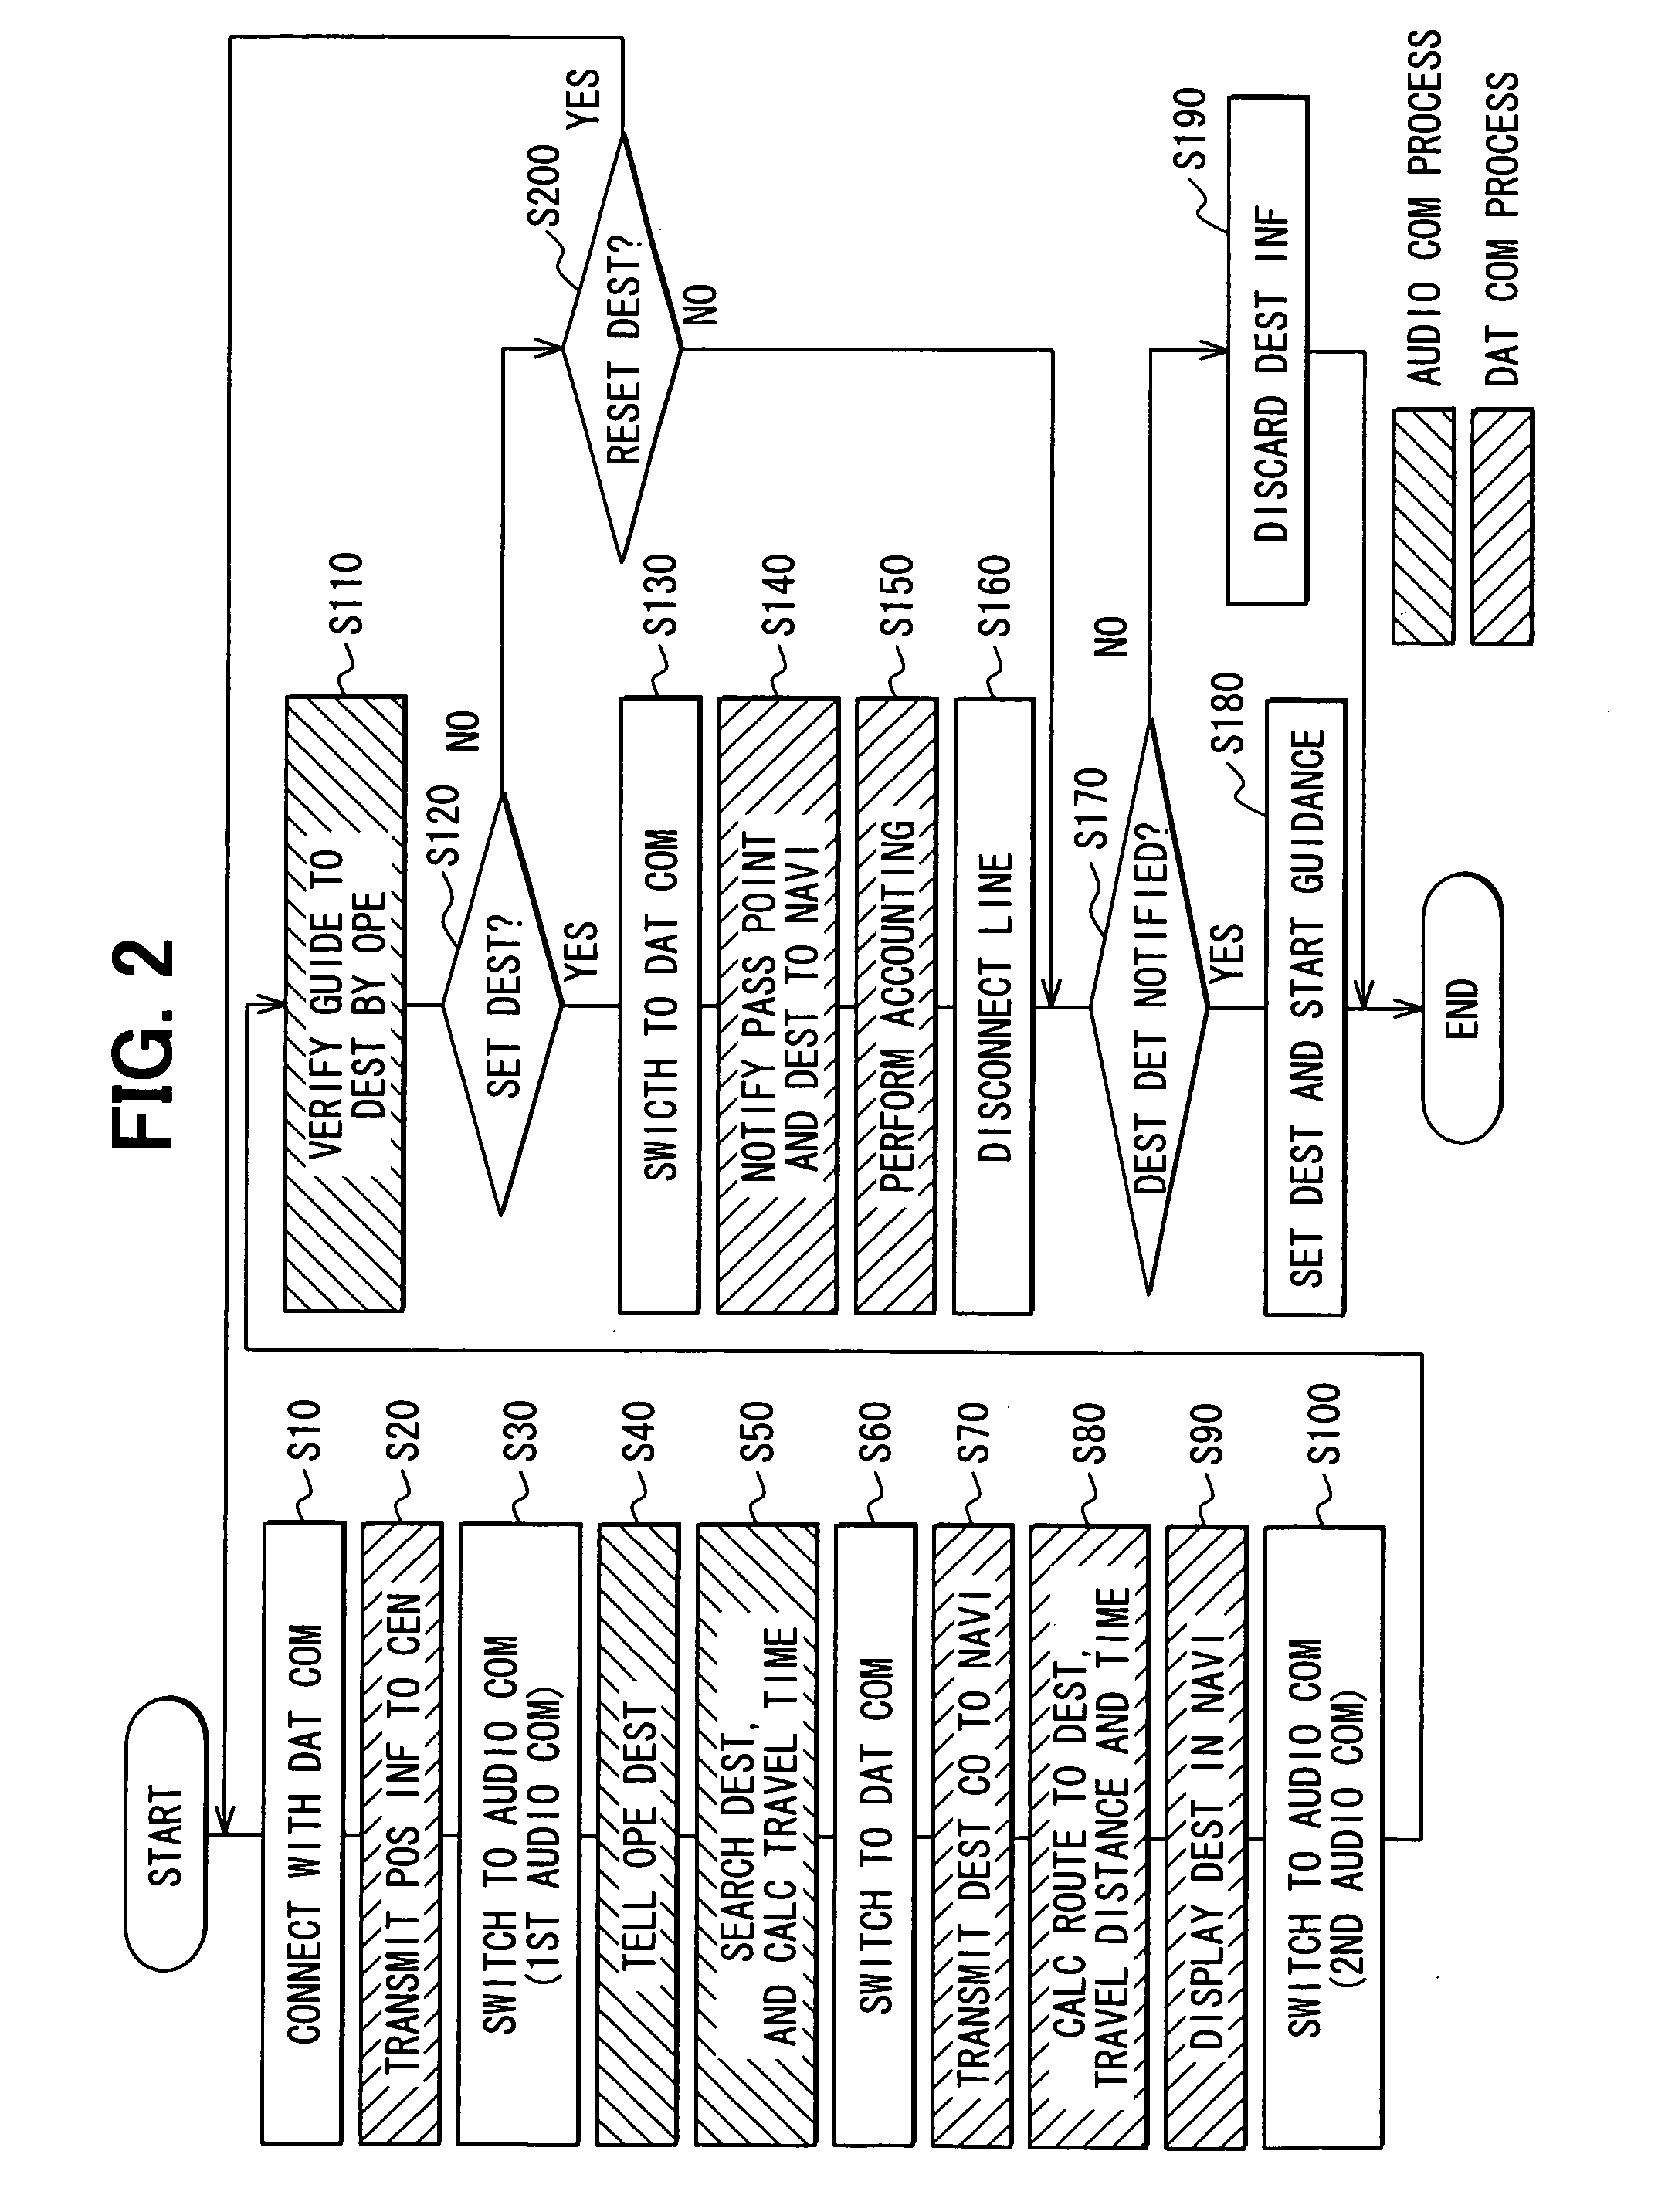 Navigation system and method for navigating route to destination